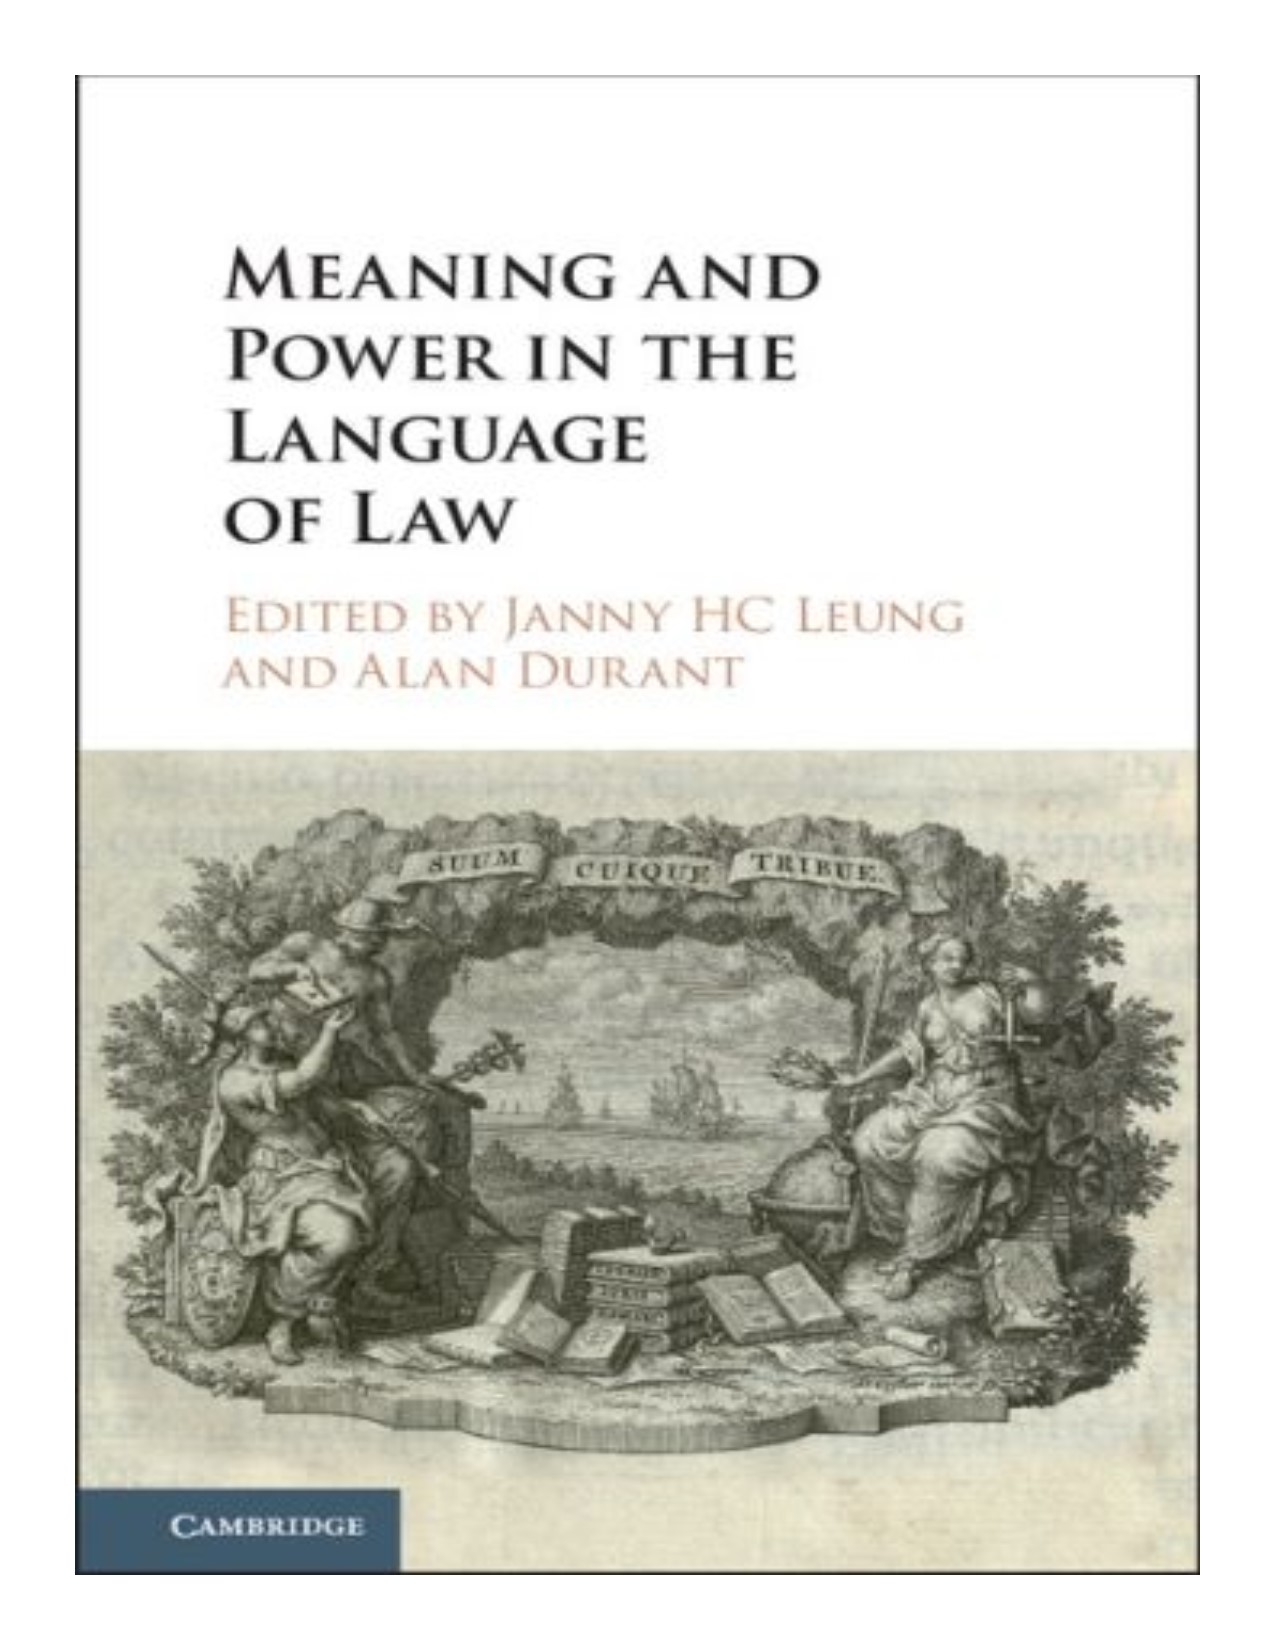 Meaning and power in the language of law